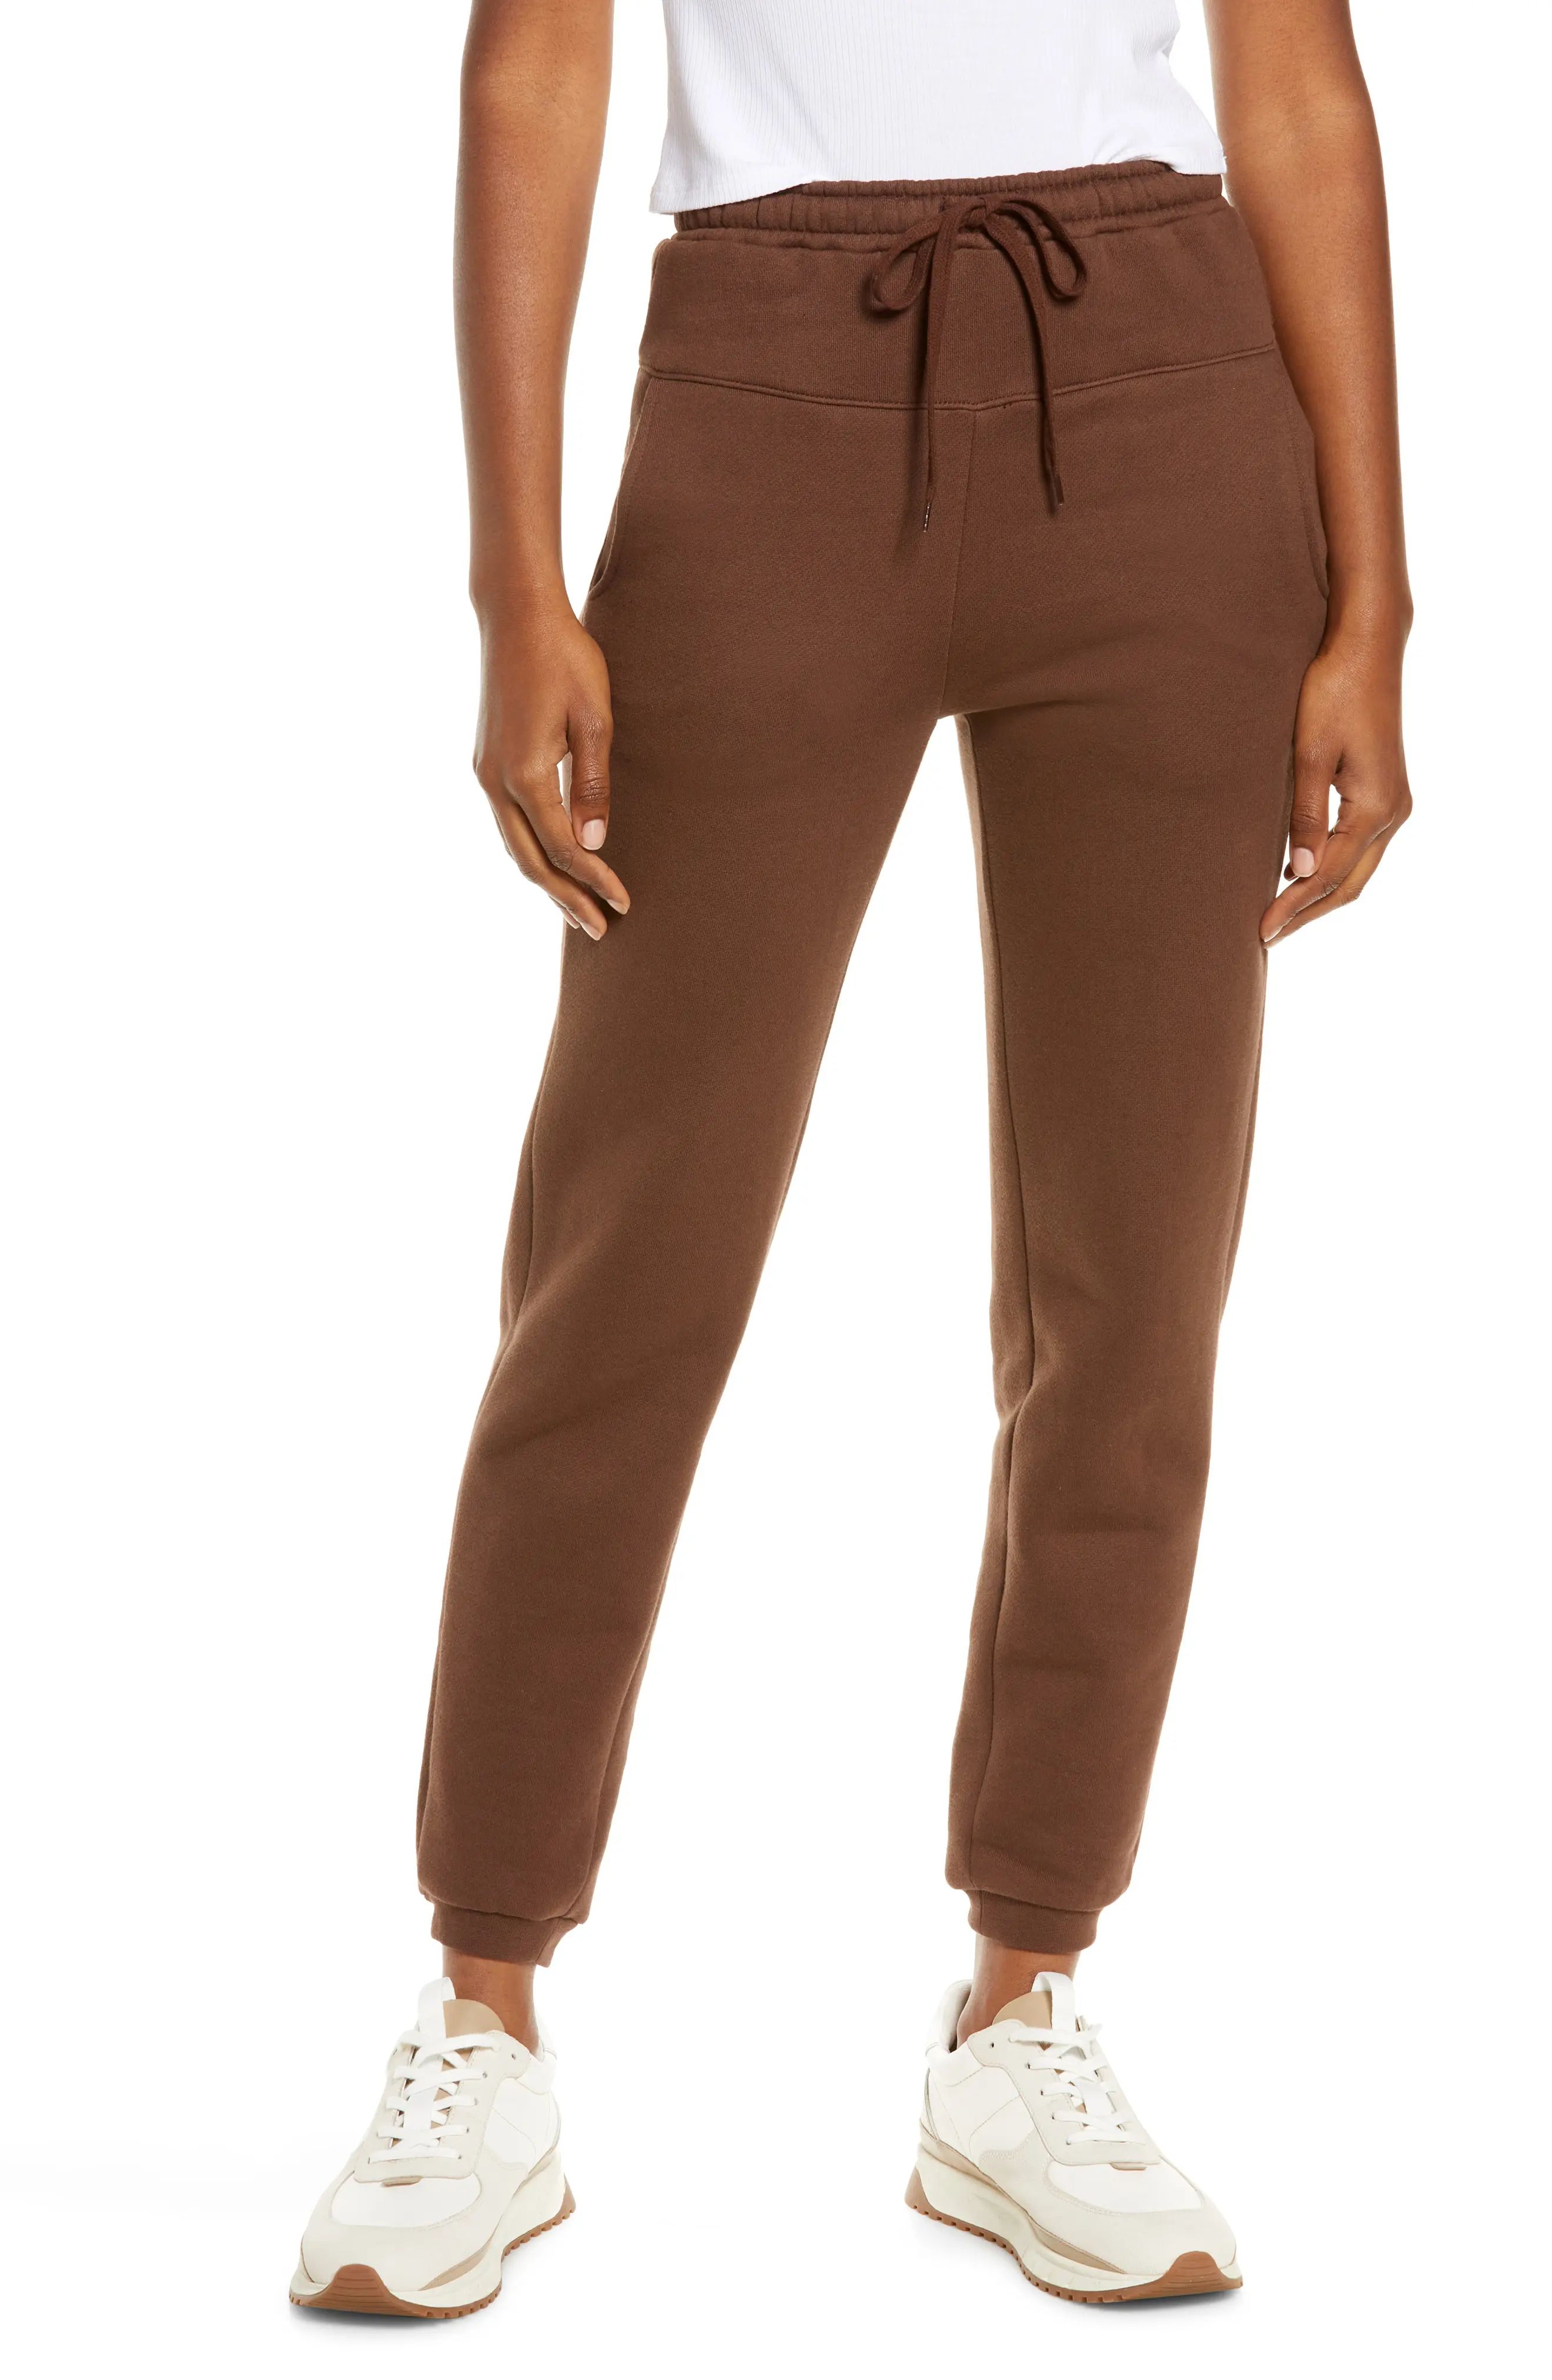 Madewell MWL Betterterry Jogger Sweatpants in Hot Cocoa at Nordstrom, Size Medium | Nordstrom